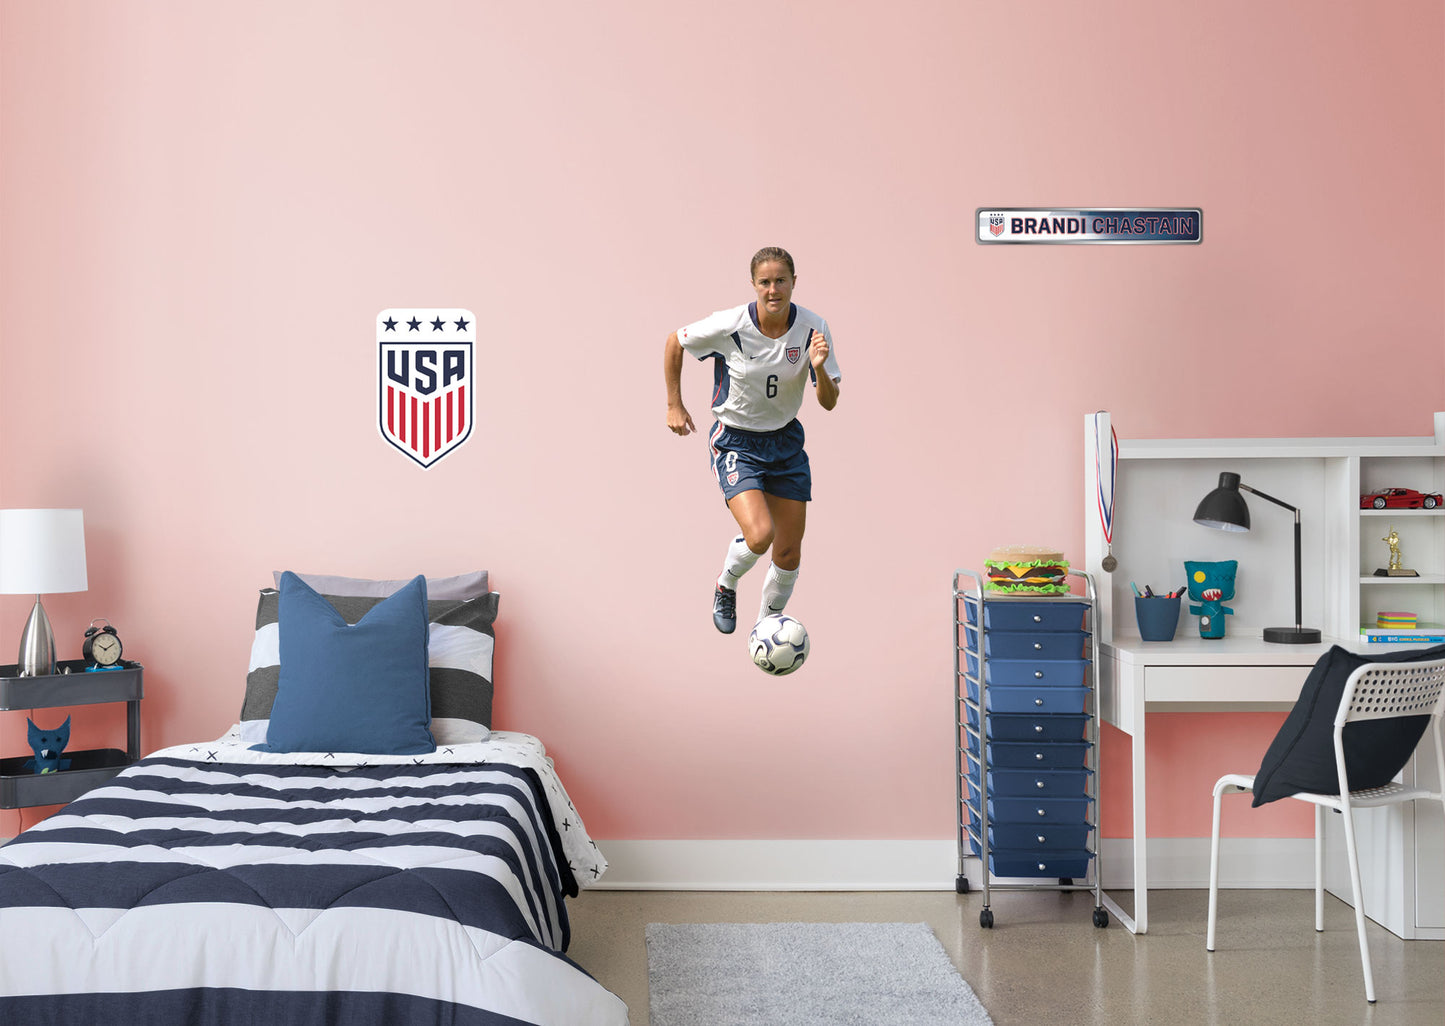 Brandi Chastain RealBig        - Officially Licensed US Soccer Removable Wall   Adhesive Decal